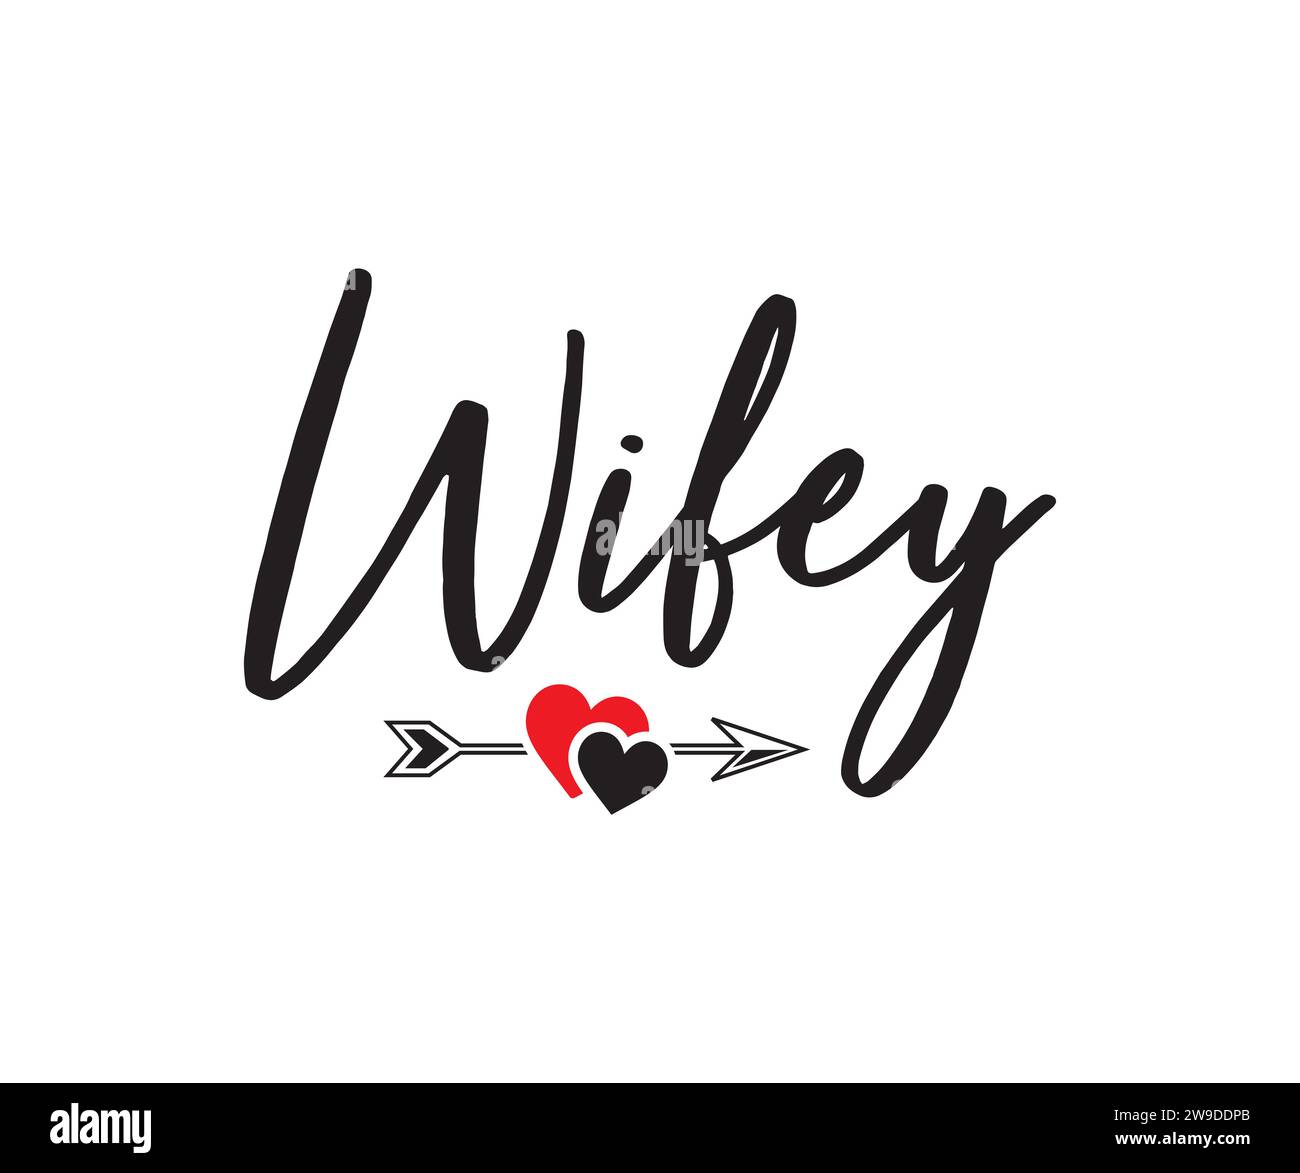 Wifey Hubby SVG, Cricut silhouette, Wife Vector, hubby clipart, husband Vector, wedding couple SVG, Mr and Mrs, wifey Stock Vector